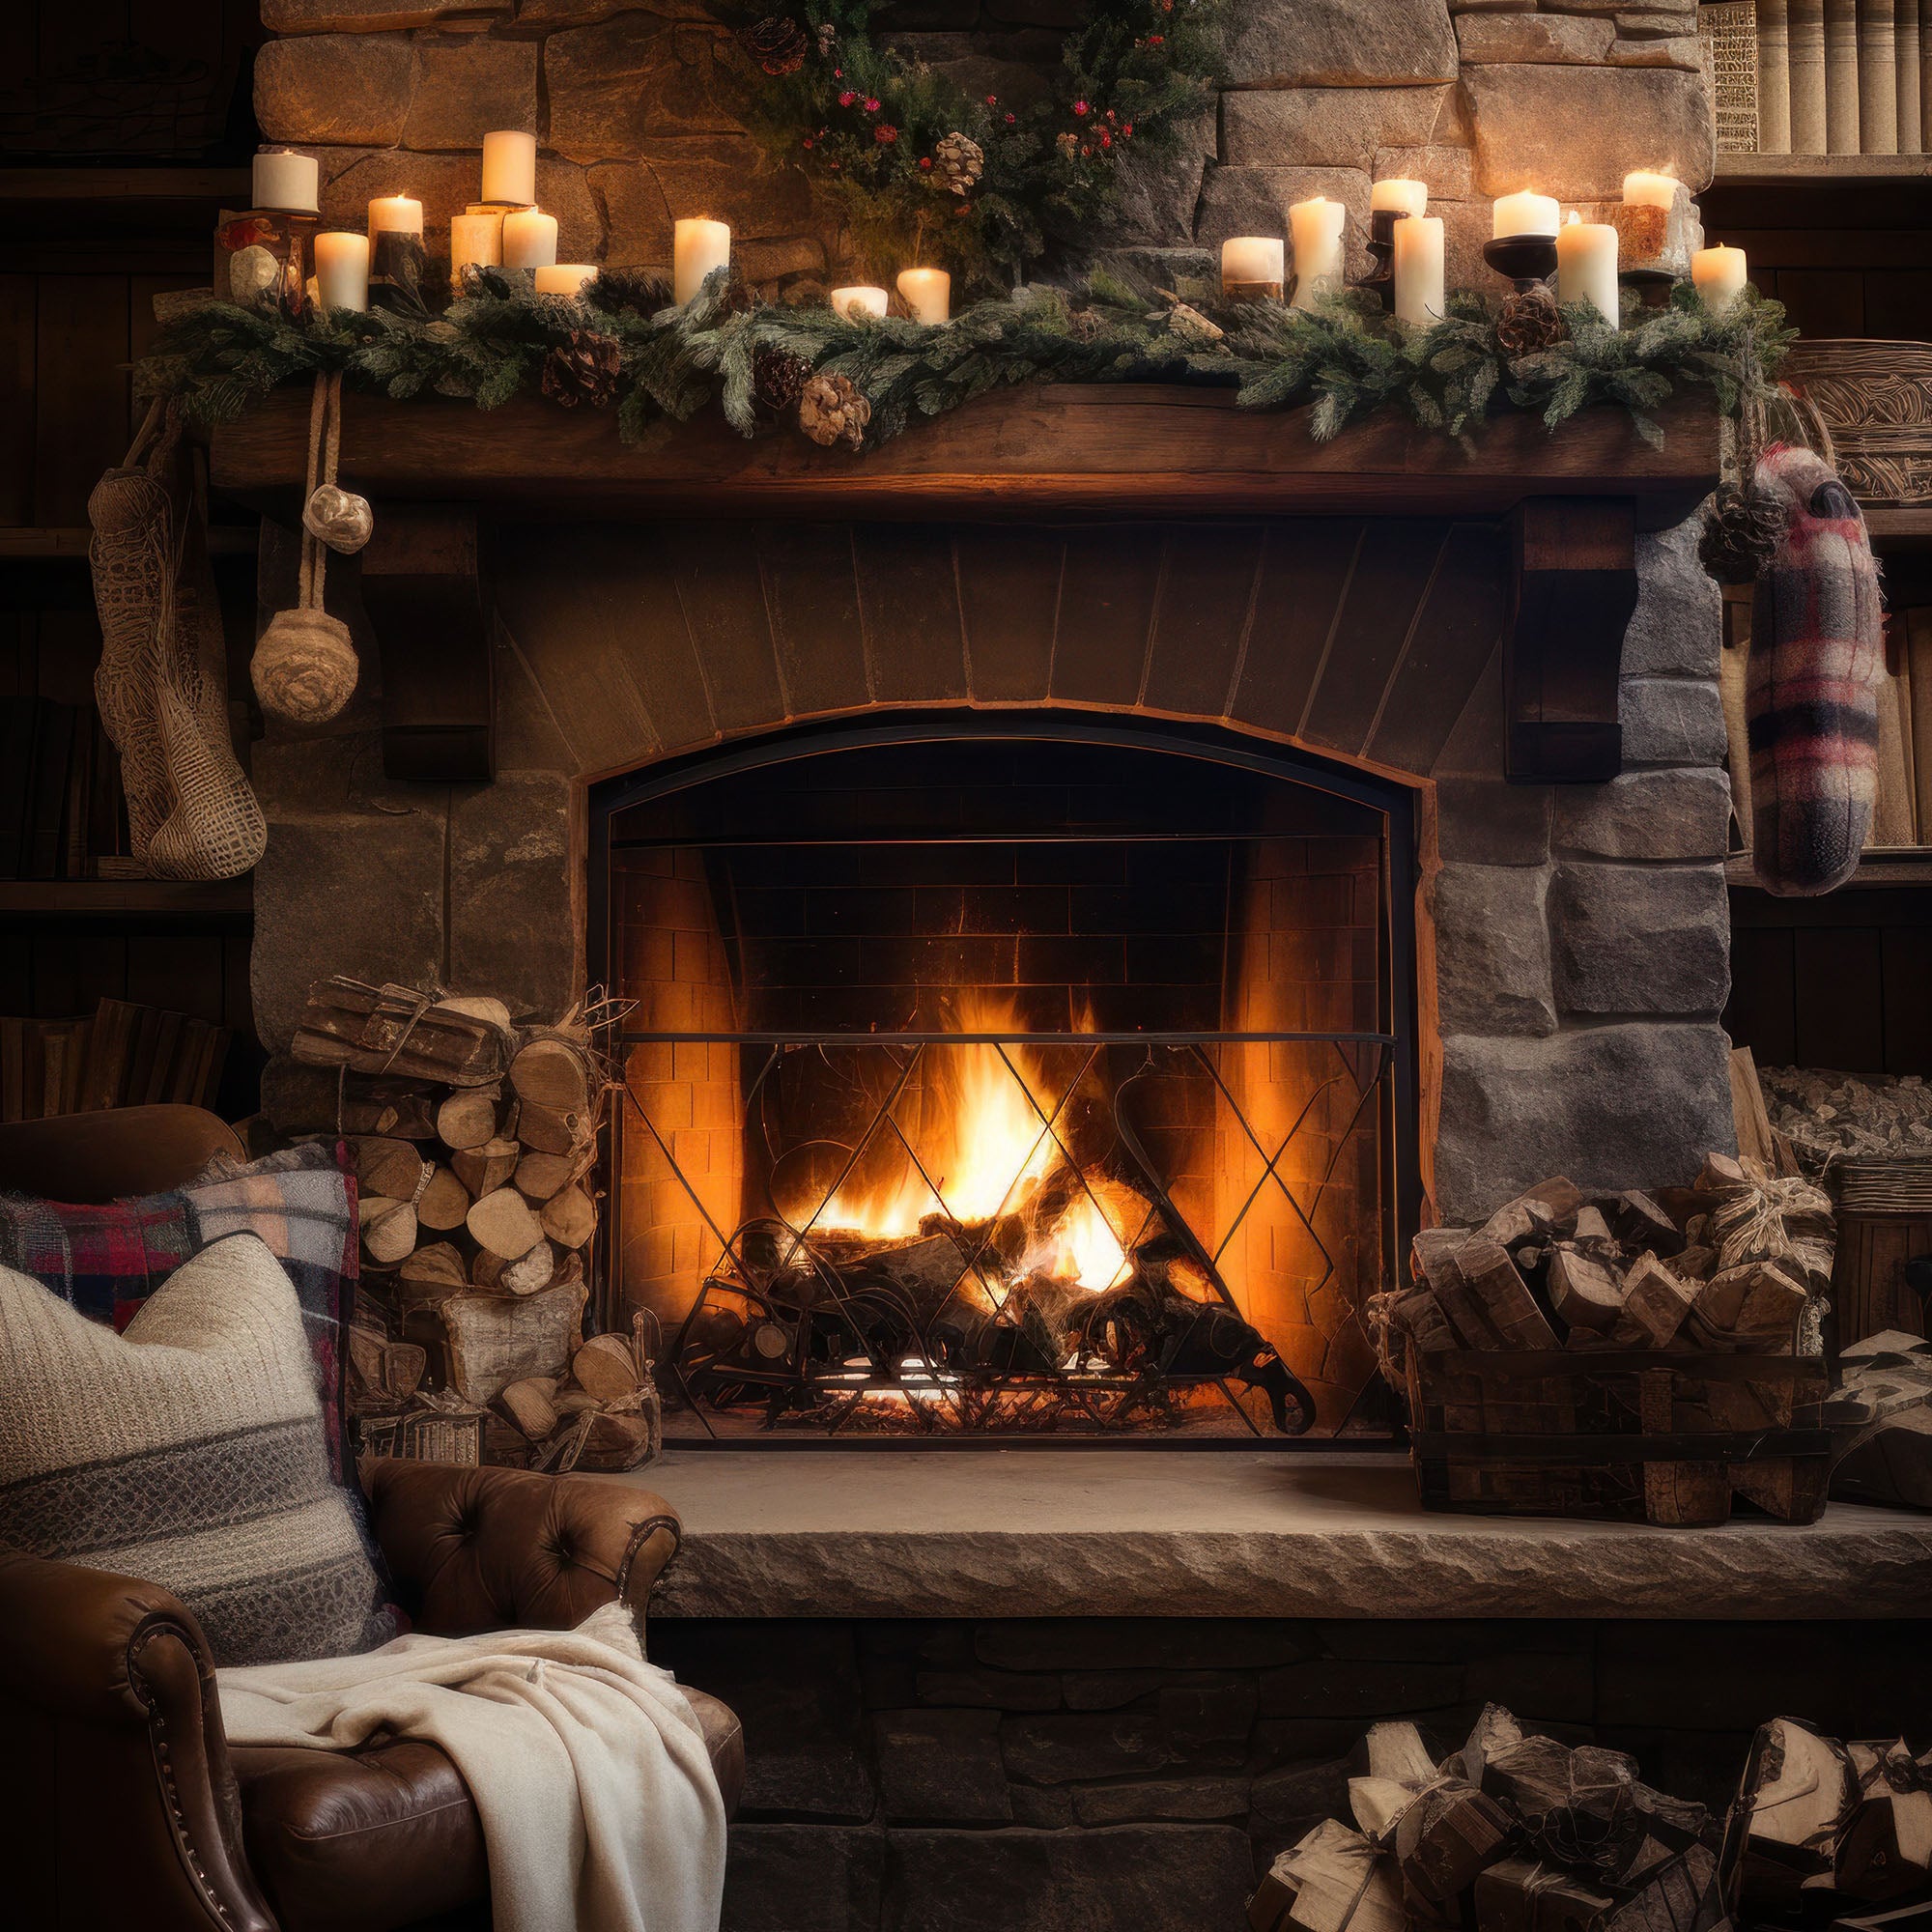 5 Ways to Make Your Home Cozy for the Holidays